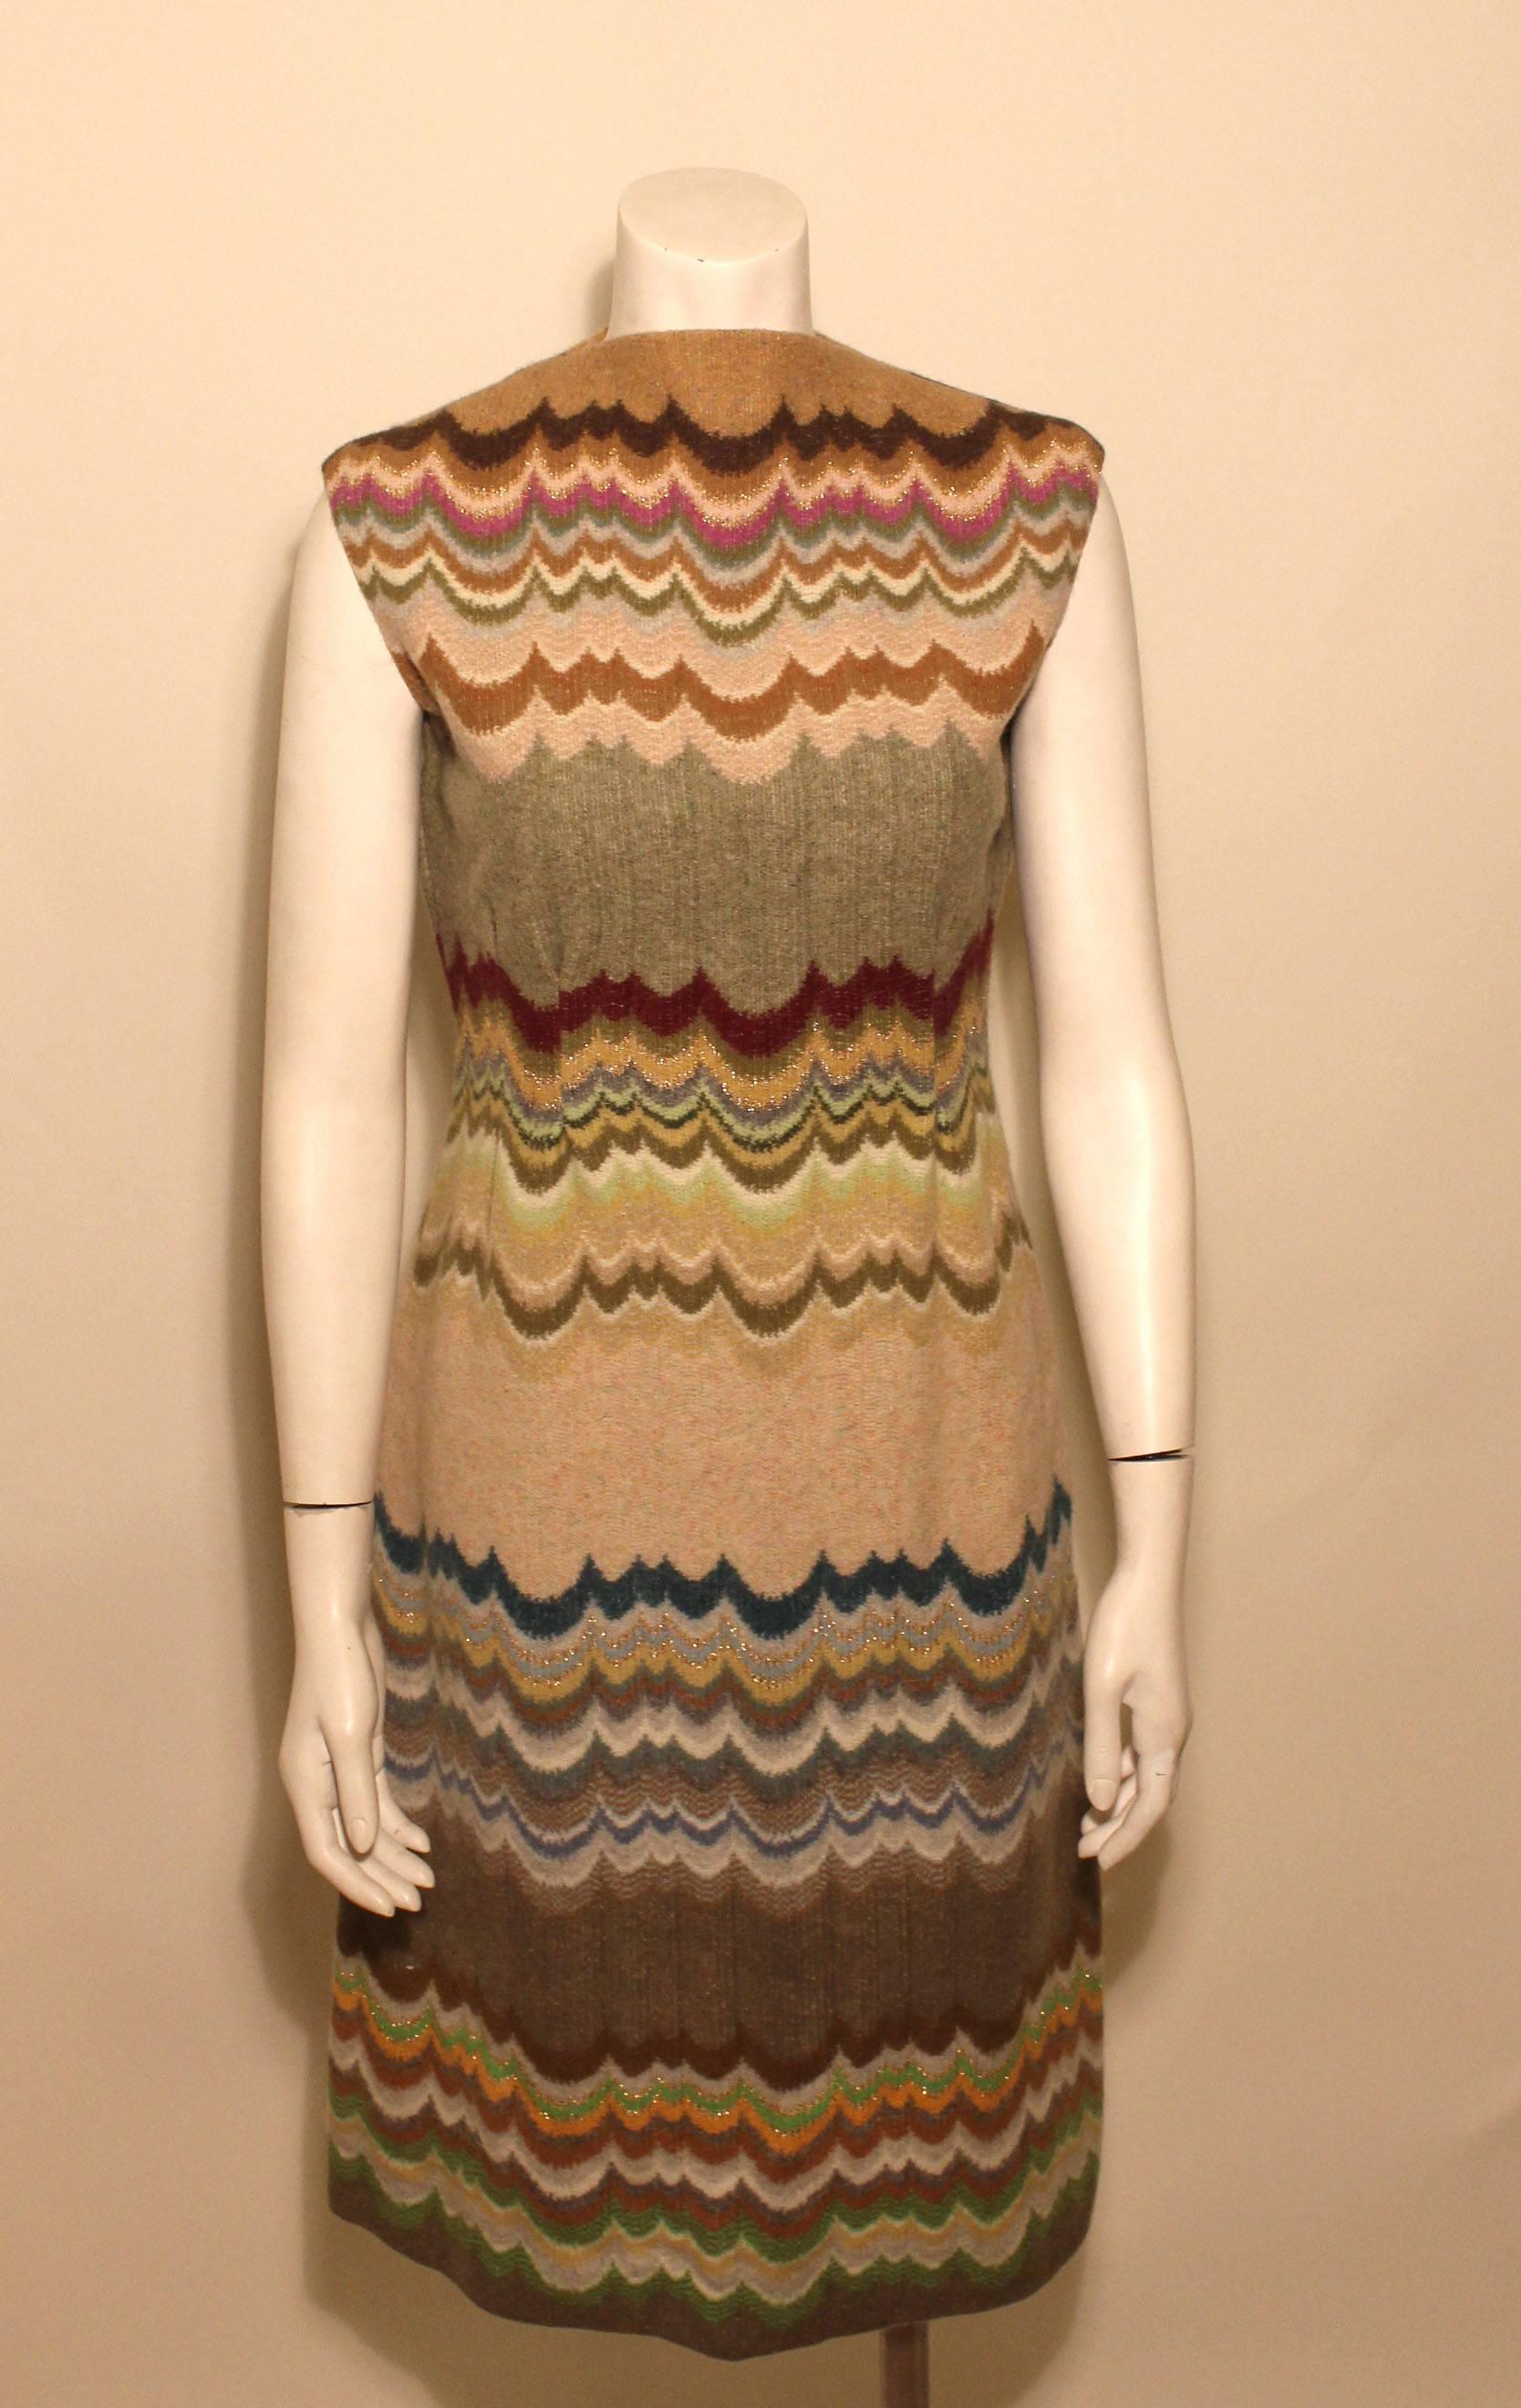 This Trigere dress is a colorful luxe wool in an unusual scallop design. The shades of neutral green and blues on the tan fabric have strips of gold lame through the design to add a subtle amount of shimmer. 